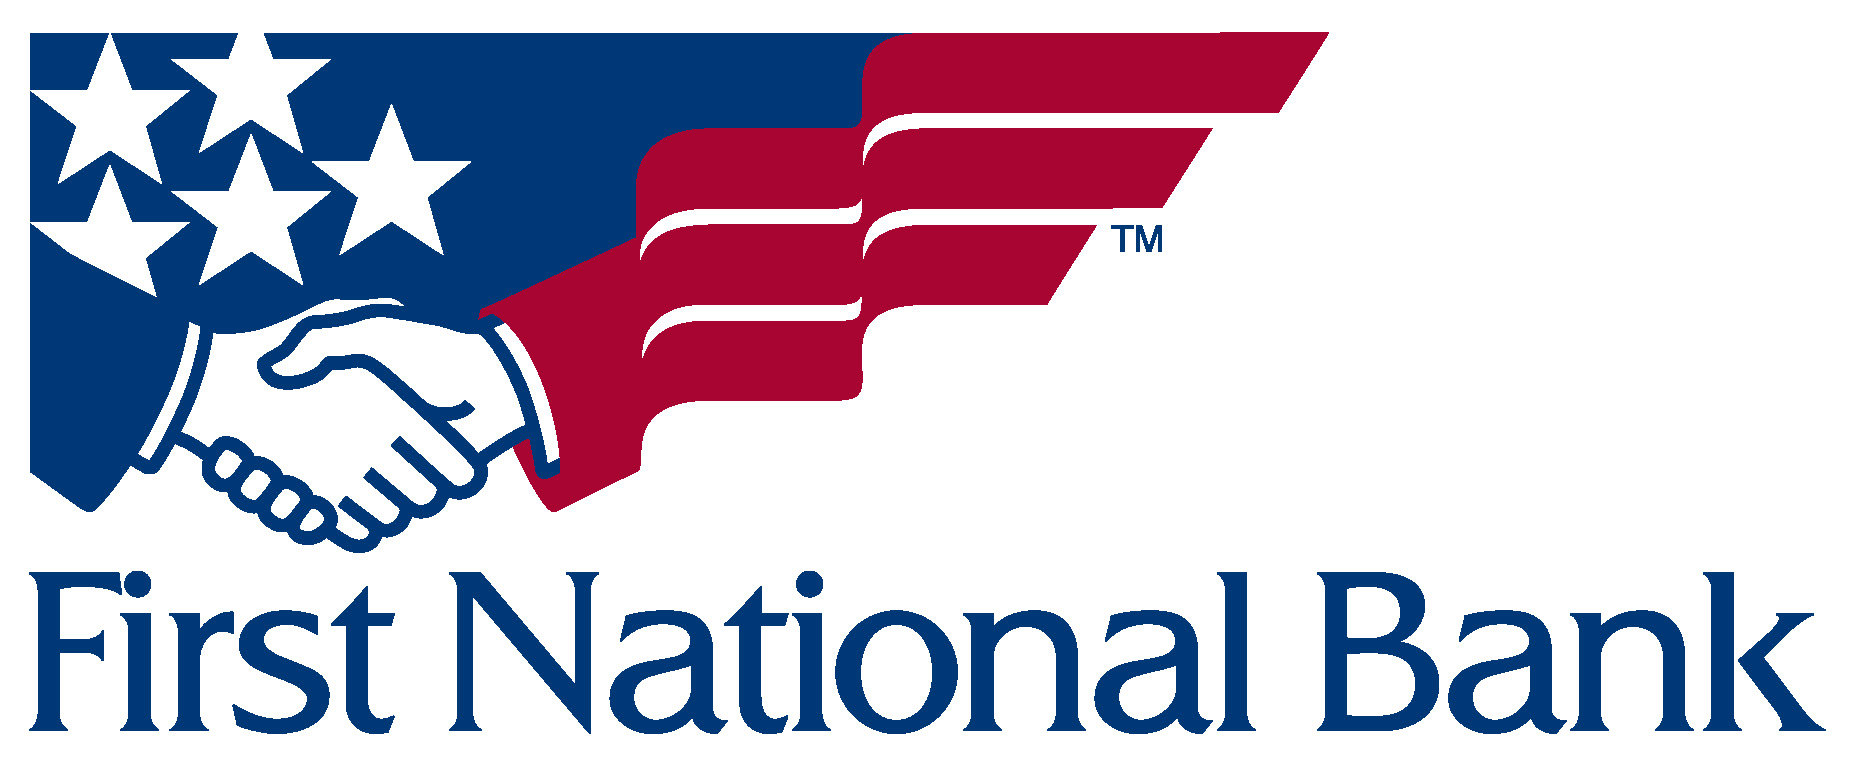 First national bank